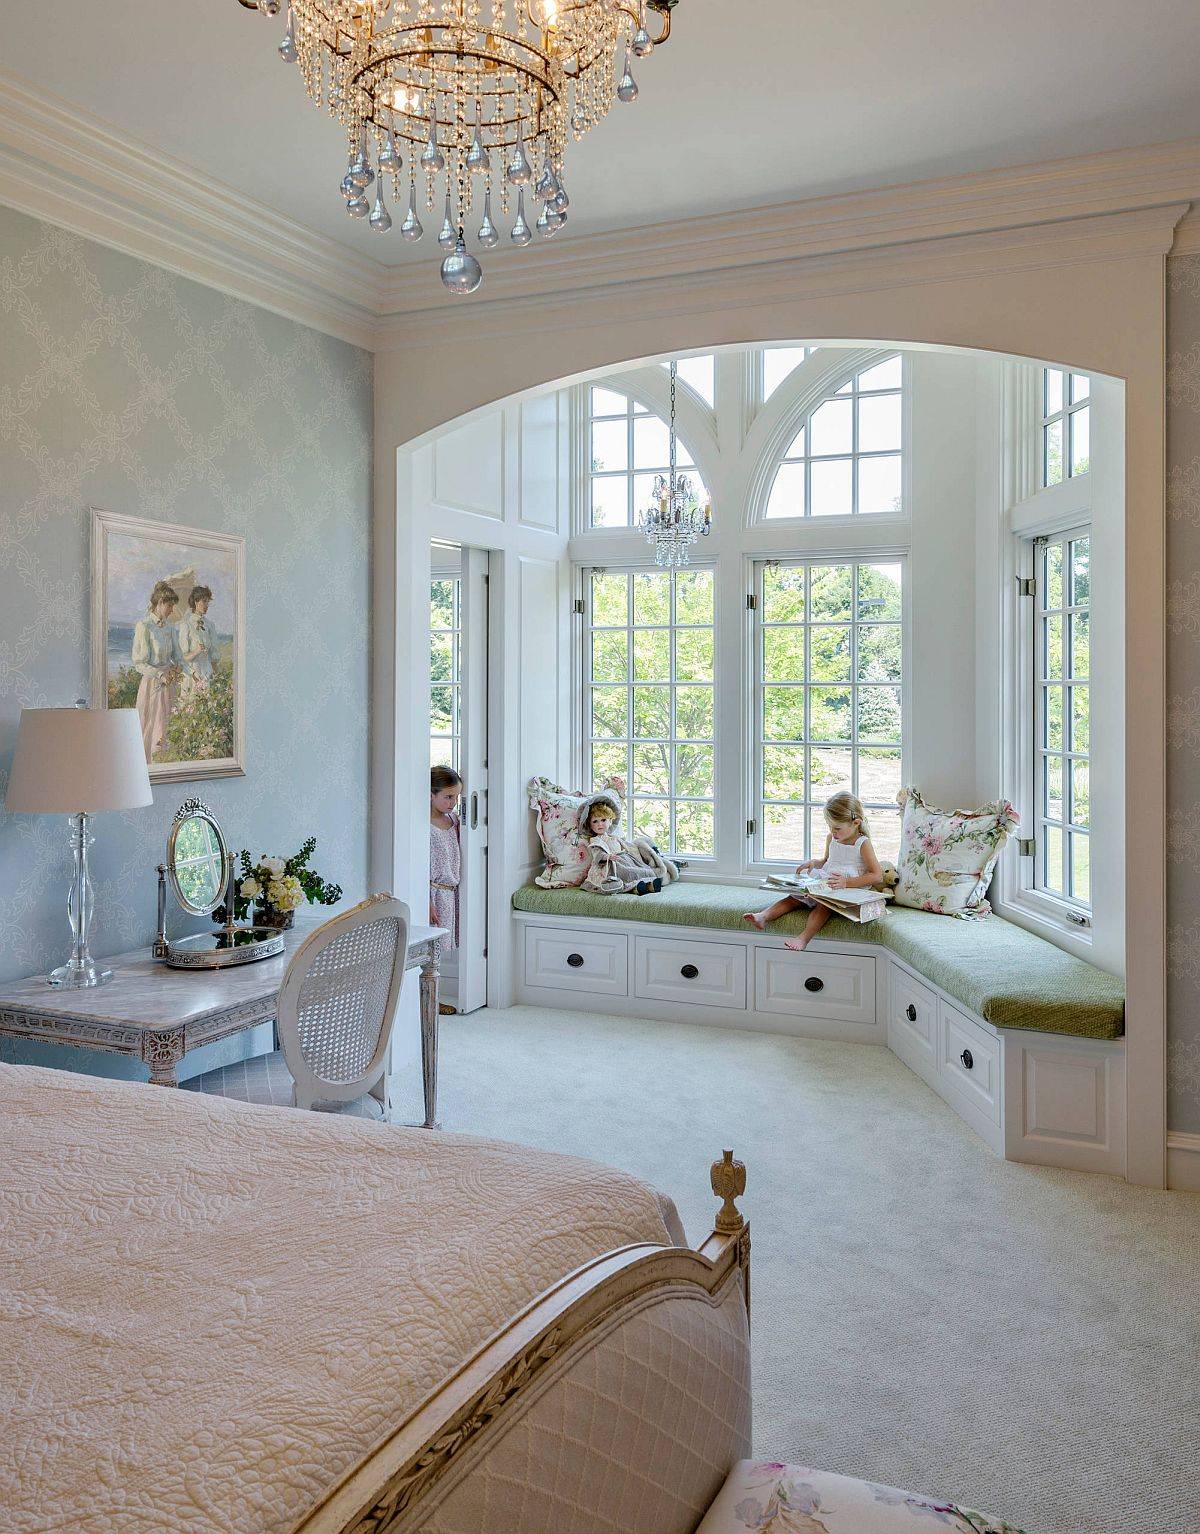 Turn-the-odd-corner-or-forgotten-niche-in-the-bedroom-into-a-fabulous-and-space-savvy-window-seat-28666